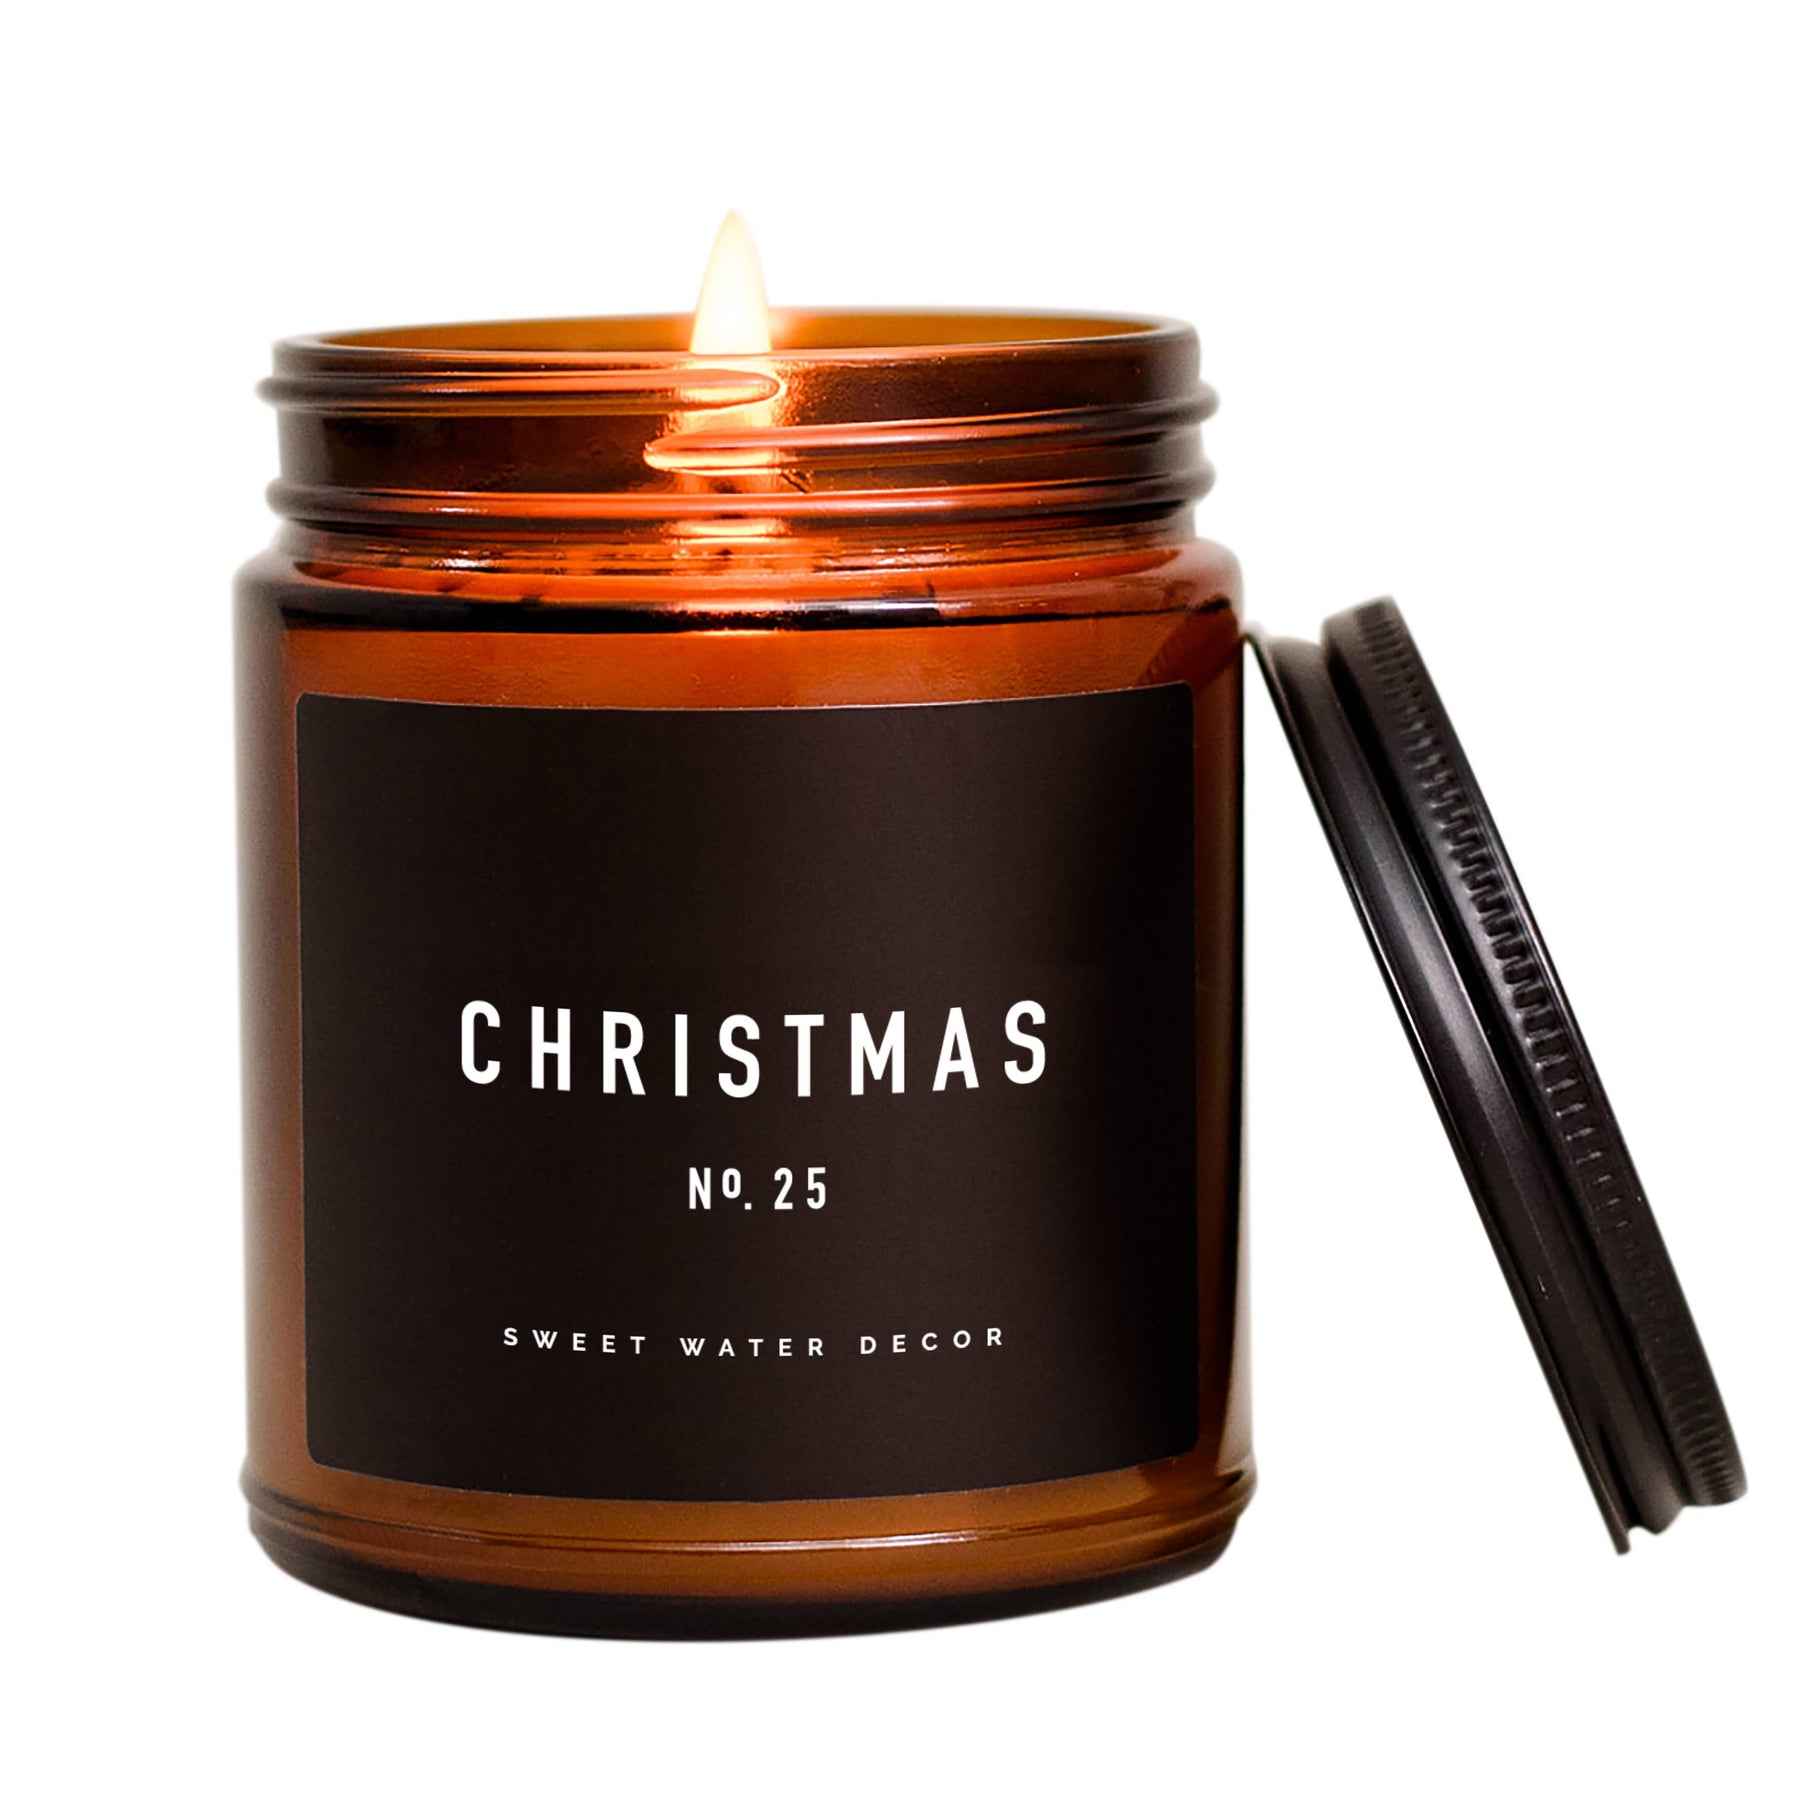 Sweet Water Decor - Christmas Soy Candle - Amber Jar - 9 oz